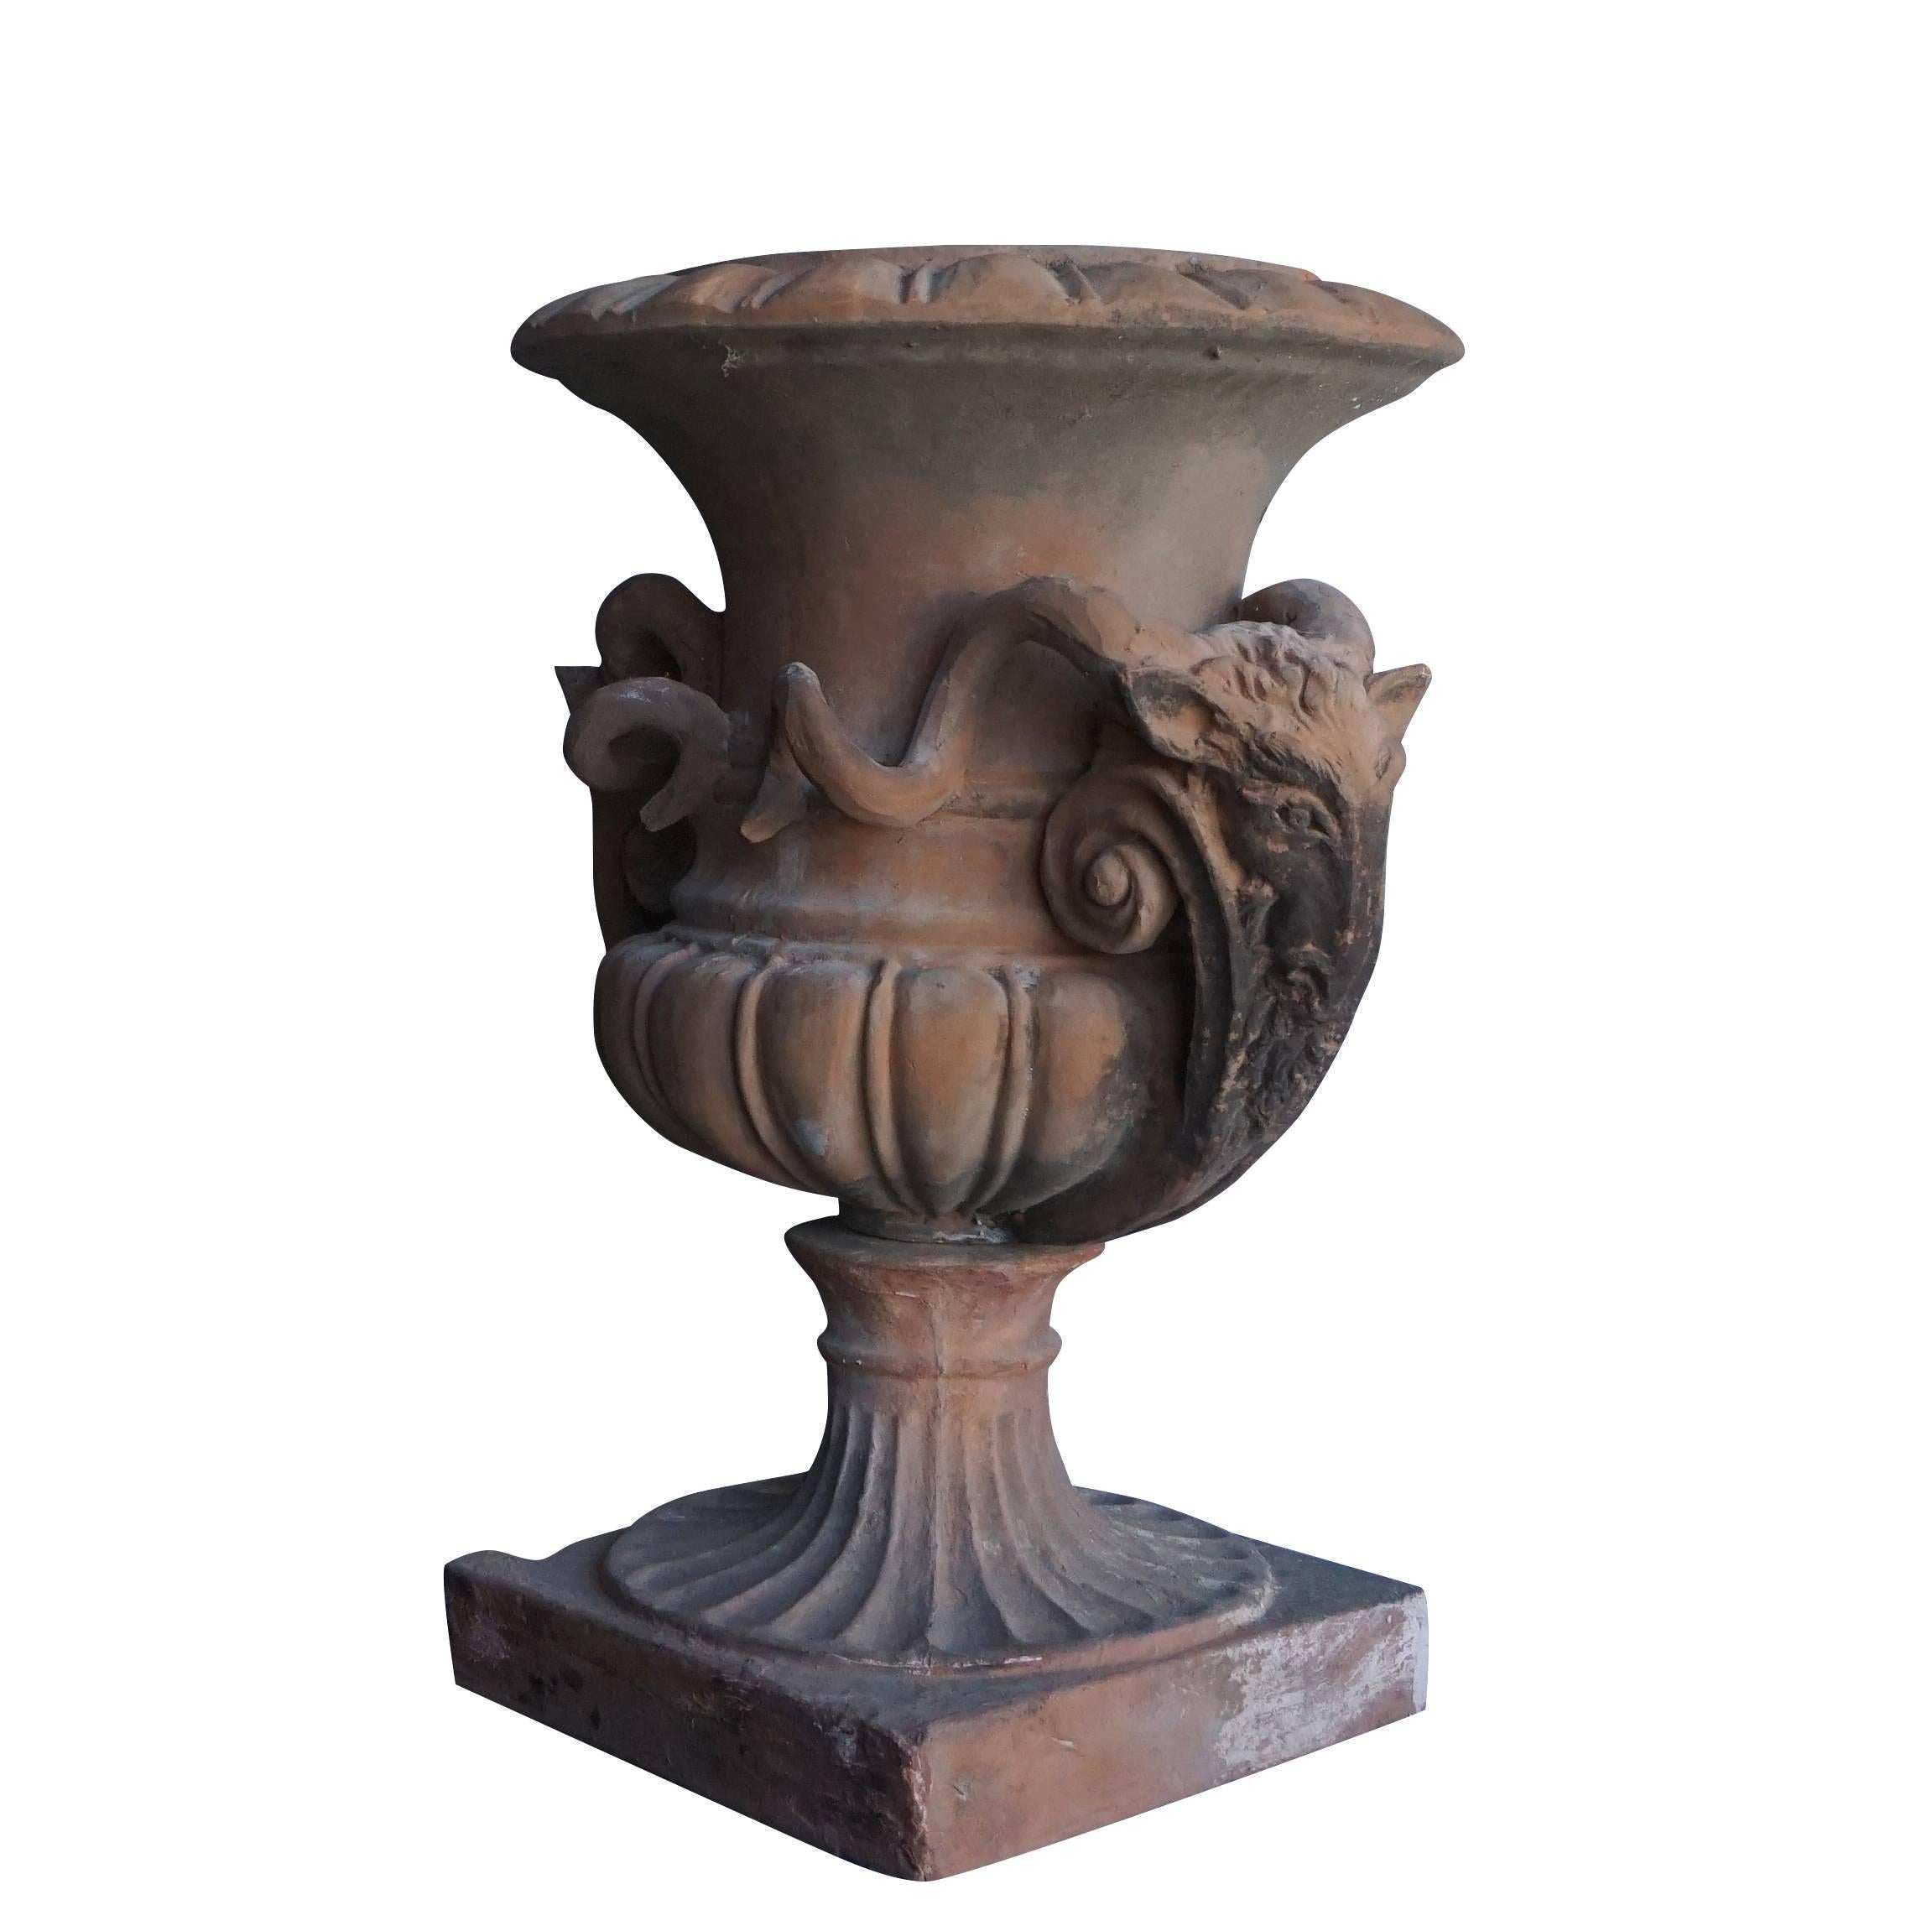 A very rare pair of Tuscan neoclassical style terra cotta urns with a lobed bodice and goat head handles, elevated on square attached bases. A typical style from a garden in Tuscany, good condition, minor repairs perfect patina, circa 1880, Siena,